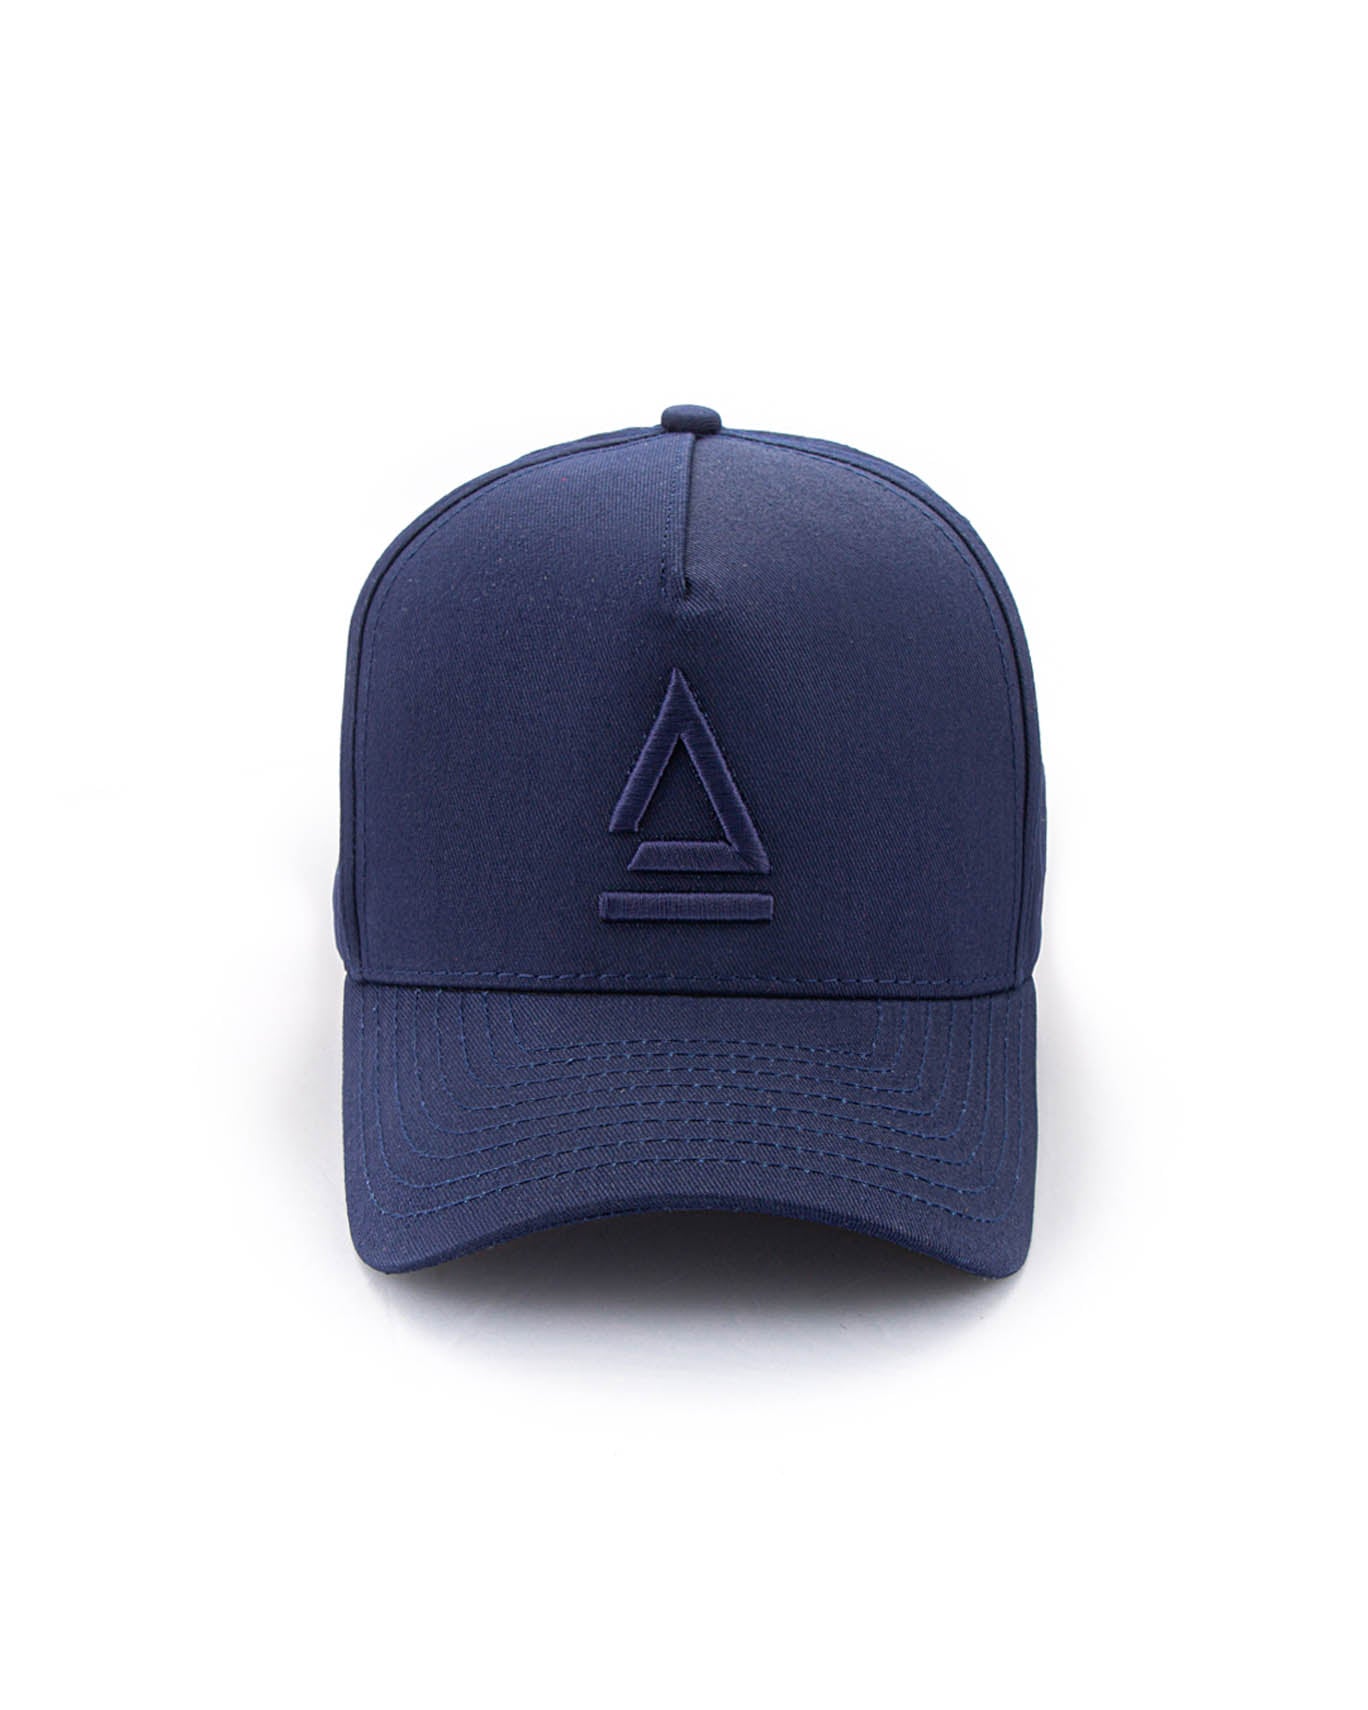 Blue Cotton - A Frame Hat--ABW STORE